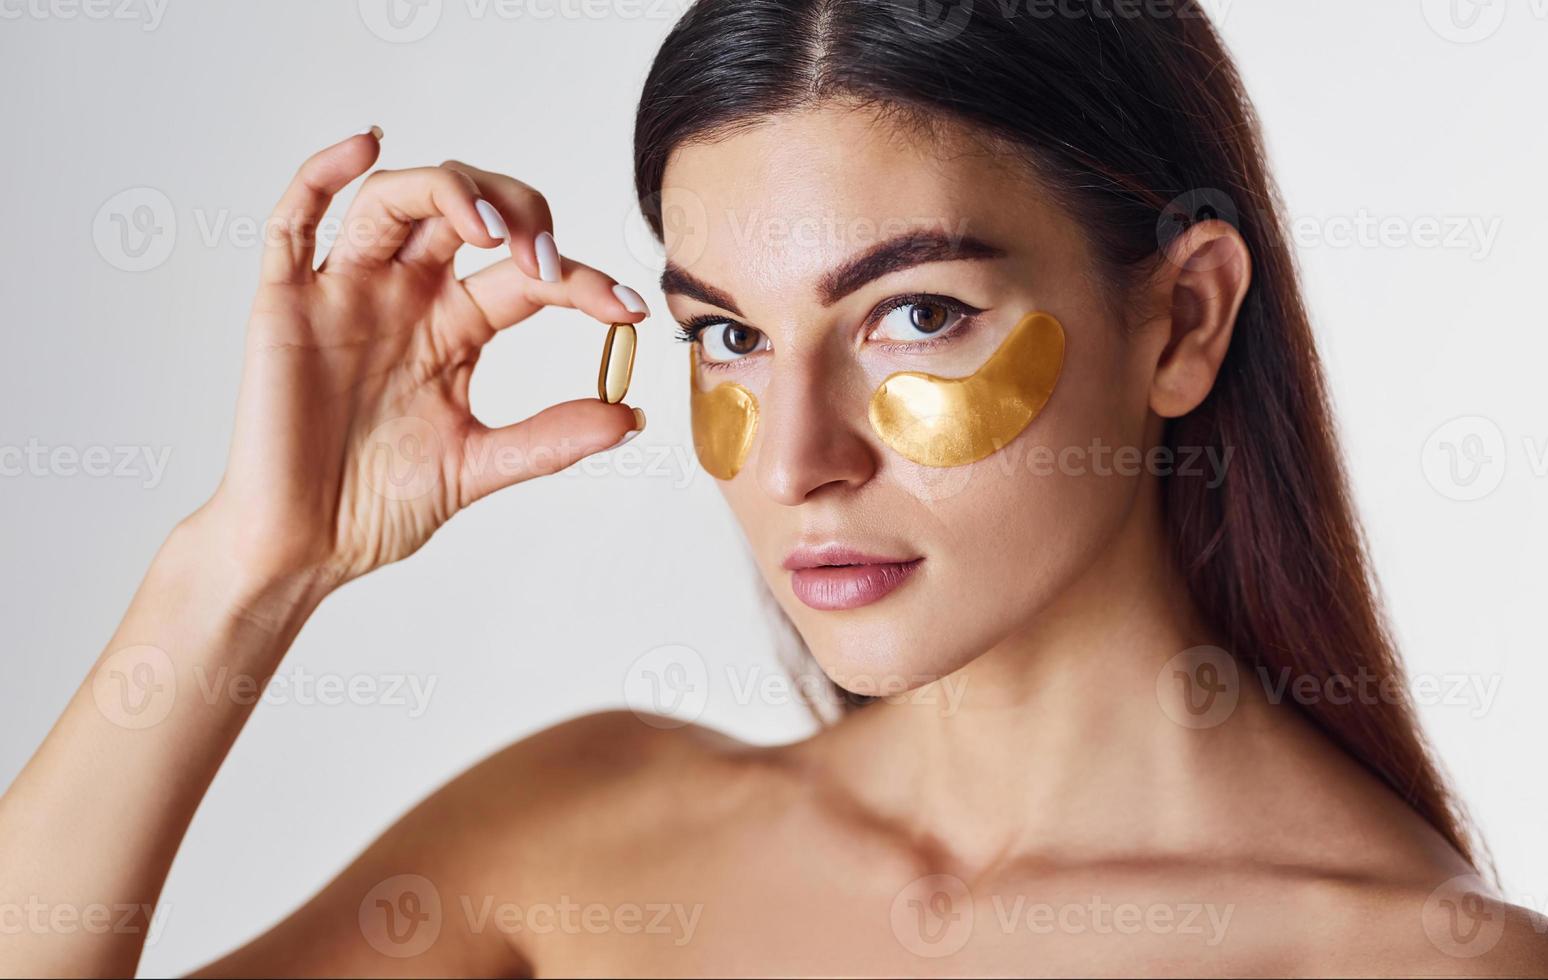 Naked woman in the studio with golden tapes near eyes and with pill in hand photo